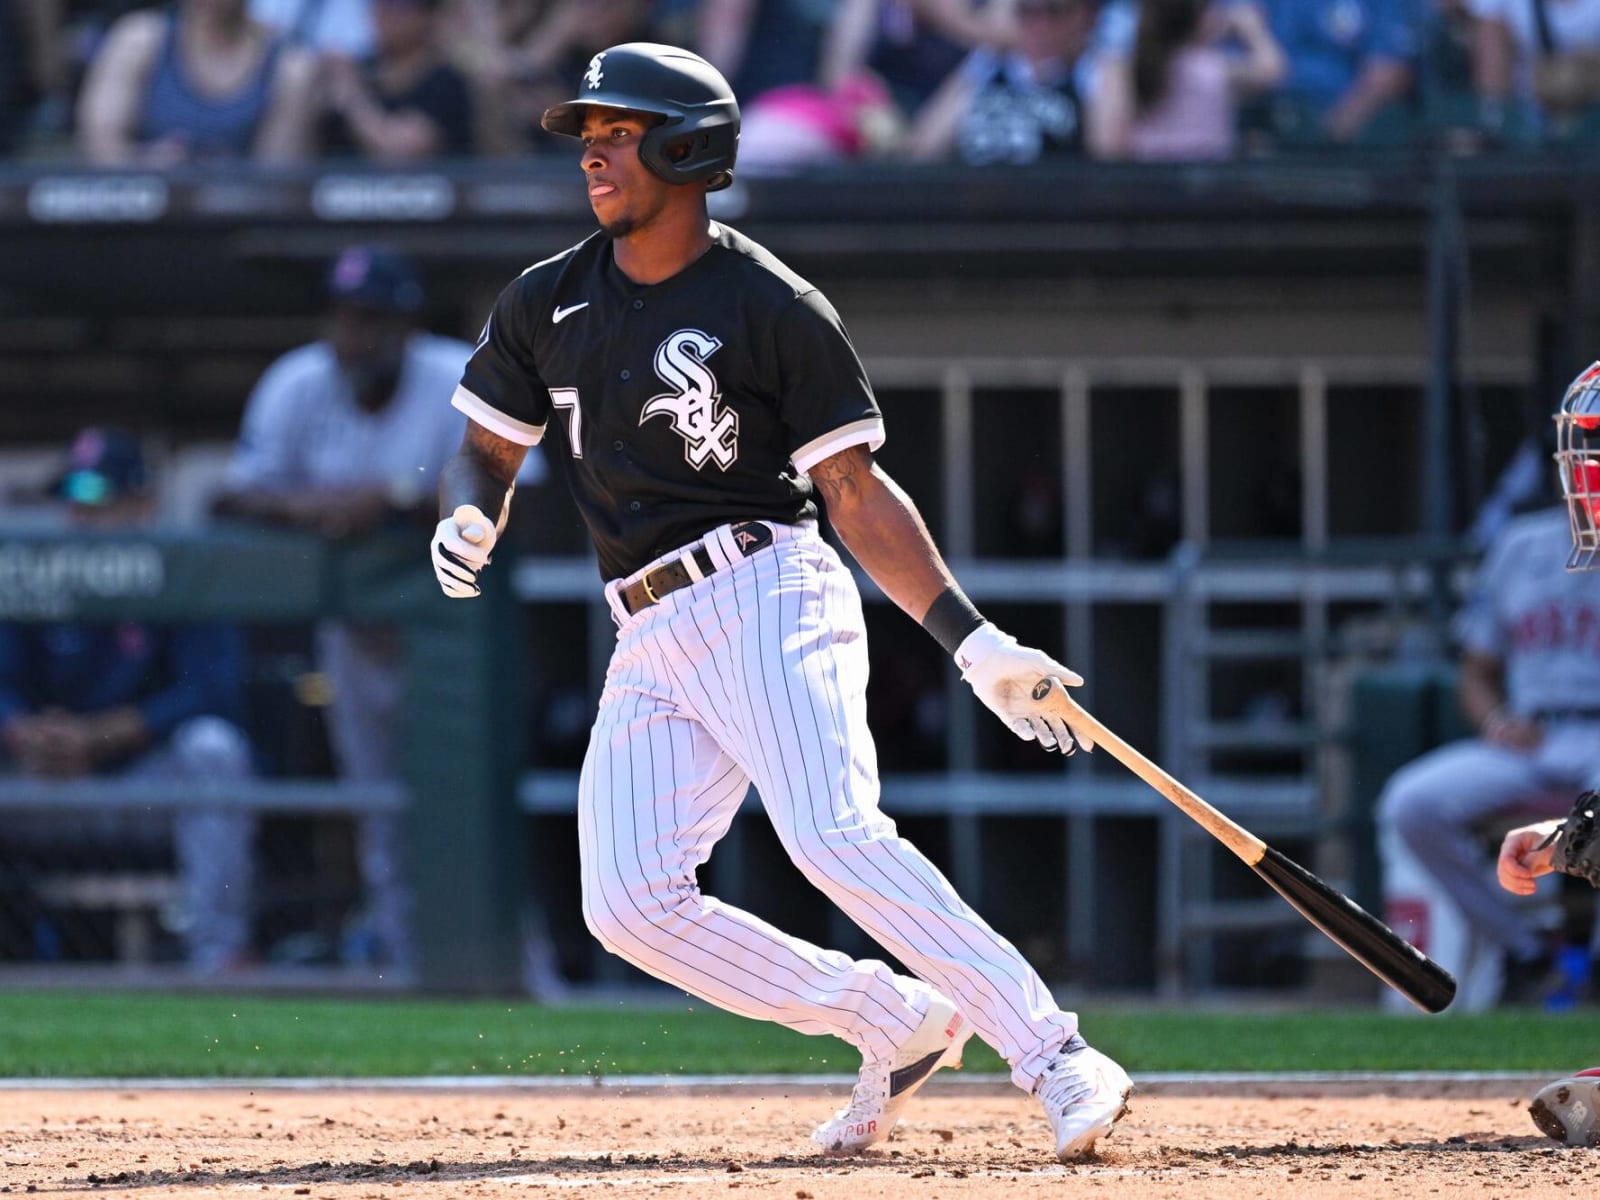 White Sox may want to shop this former All-Star